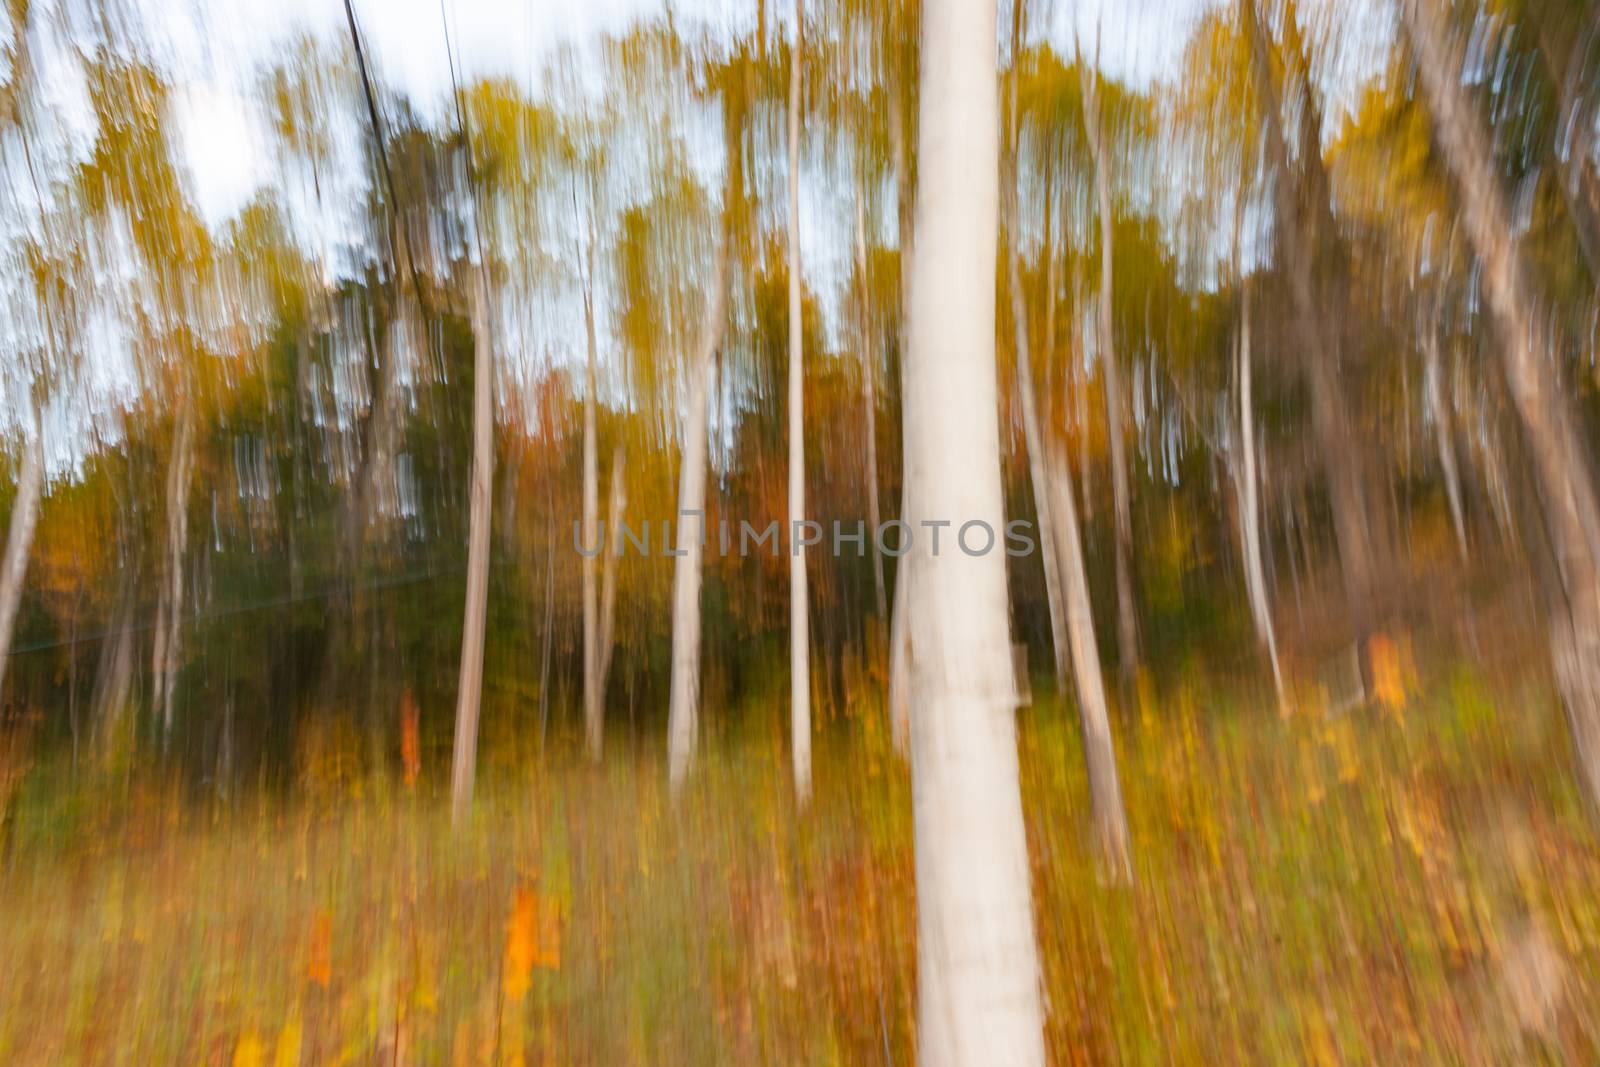 Vertical motion blur of forest impressionism background by brians101